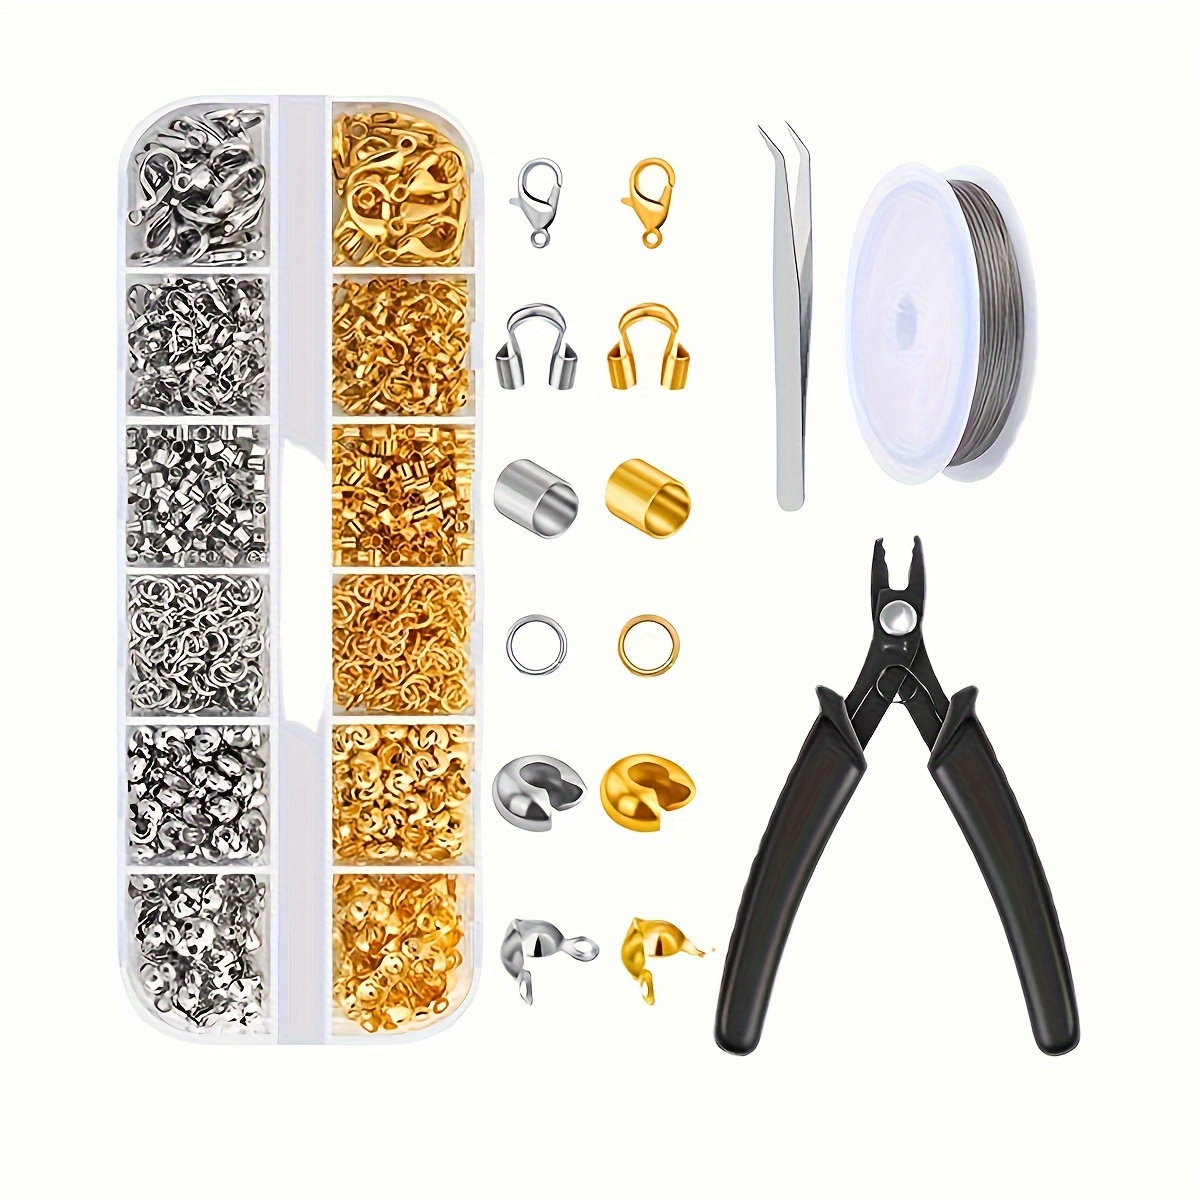 

1200 Pcs Jewelry Making Supplies Kit With Crimping Pliers, Assorted Crimp Beads, Covers, Tubes, Clasps, Jump Rings, Ends, Beading Wire For Bracelet And Fashion Phone Chain Creation